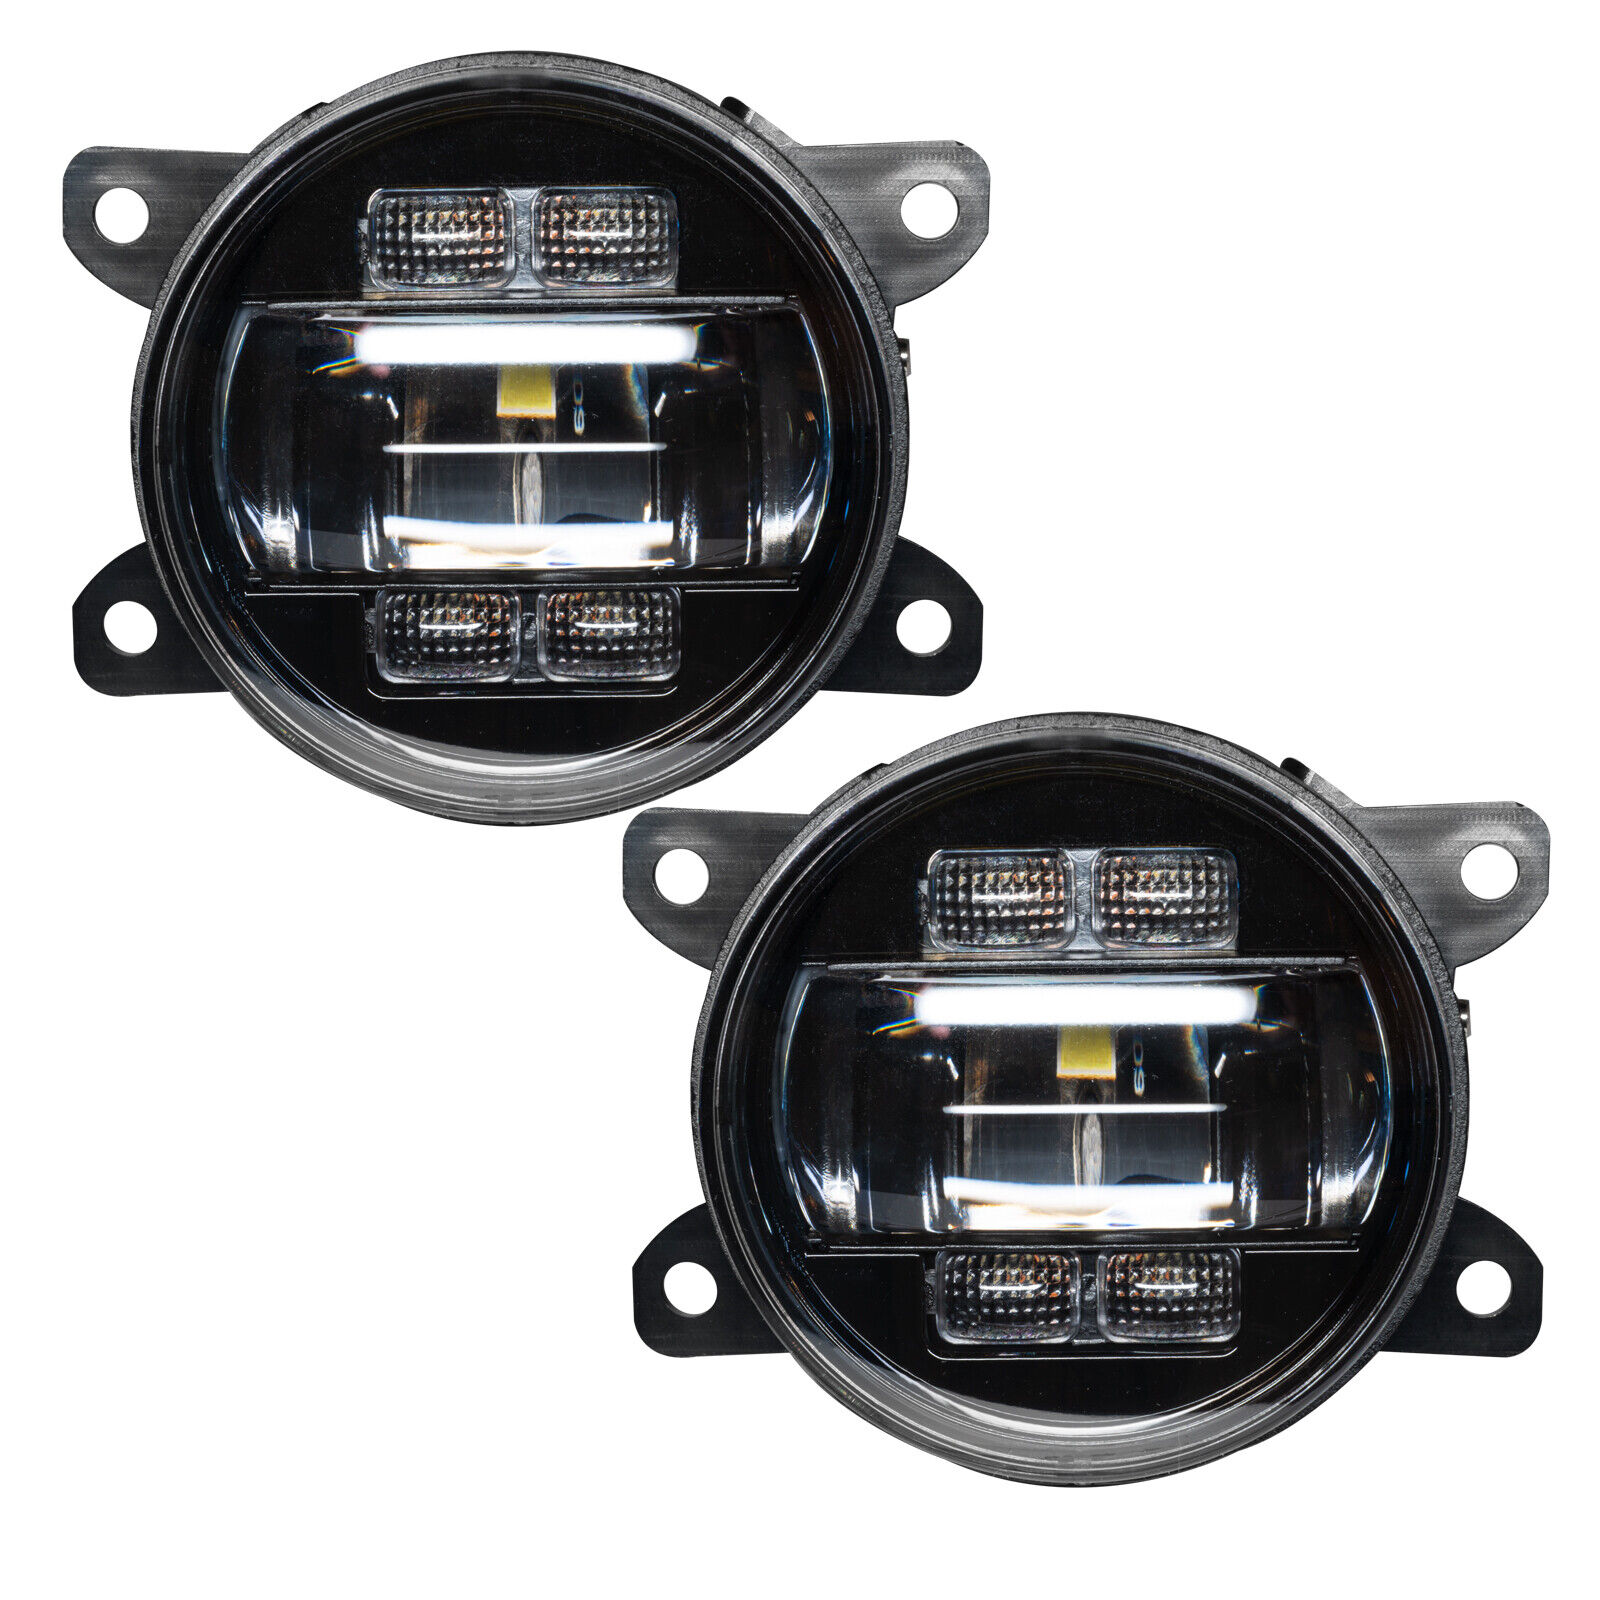 ORACLE Lighting LED Fog Lights 4in High Performance (Pair) for Select Vehicles